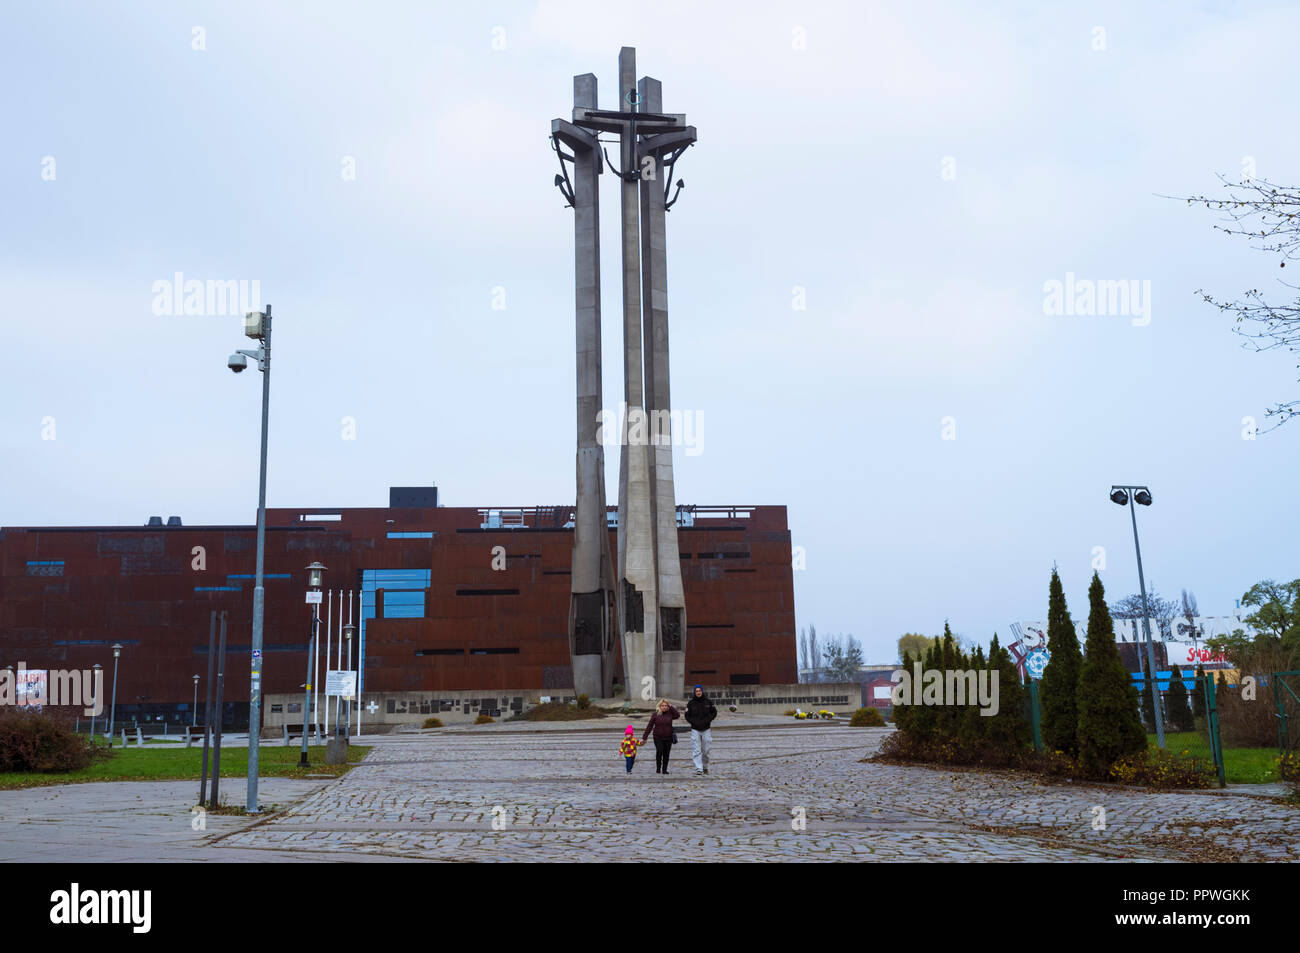 Gdansk, Pomerania, Poland : People walk through Solidarity Square. In background, the European Solidarity Centre (opened 2014) next to the entrance to Stock Photo